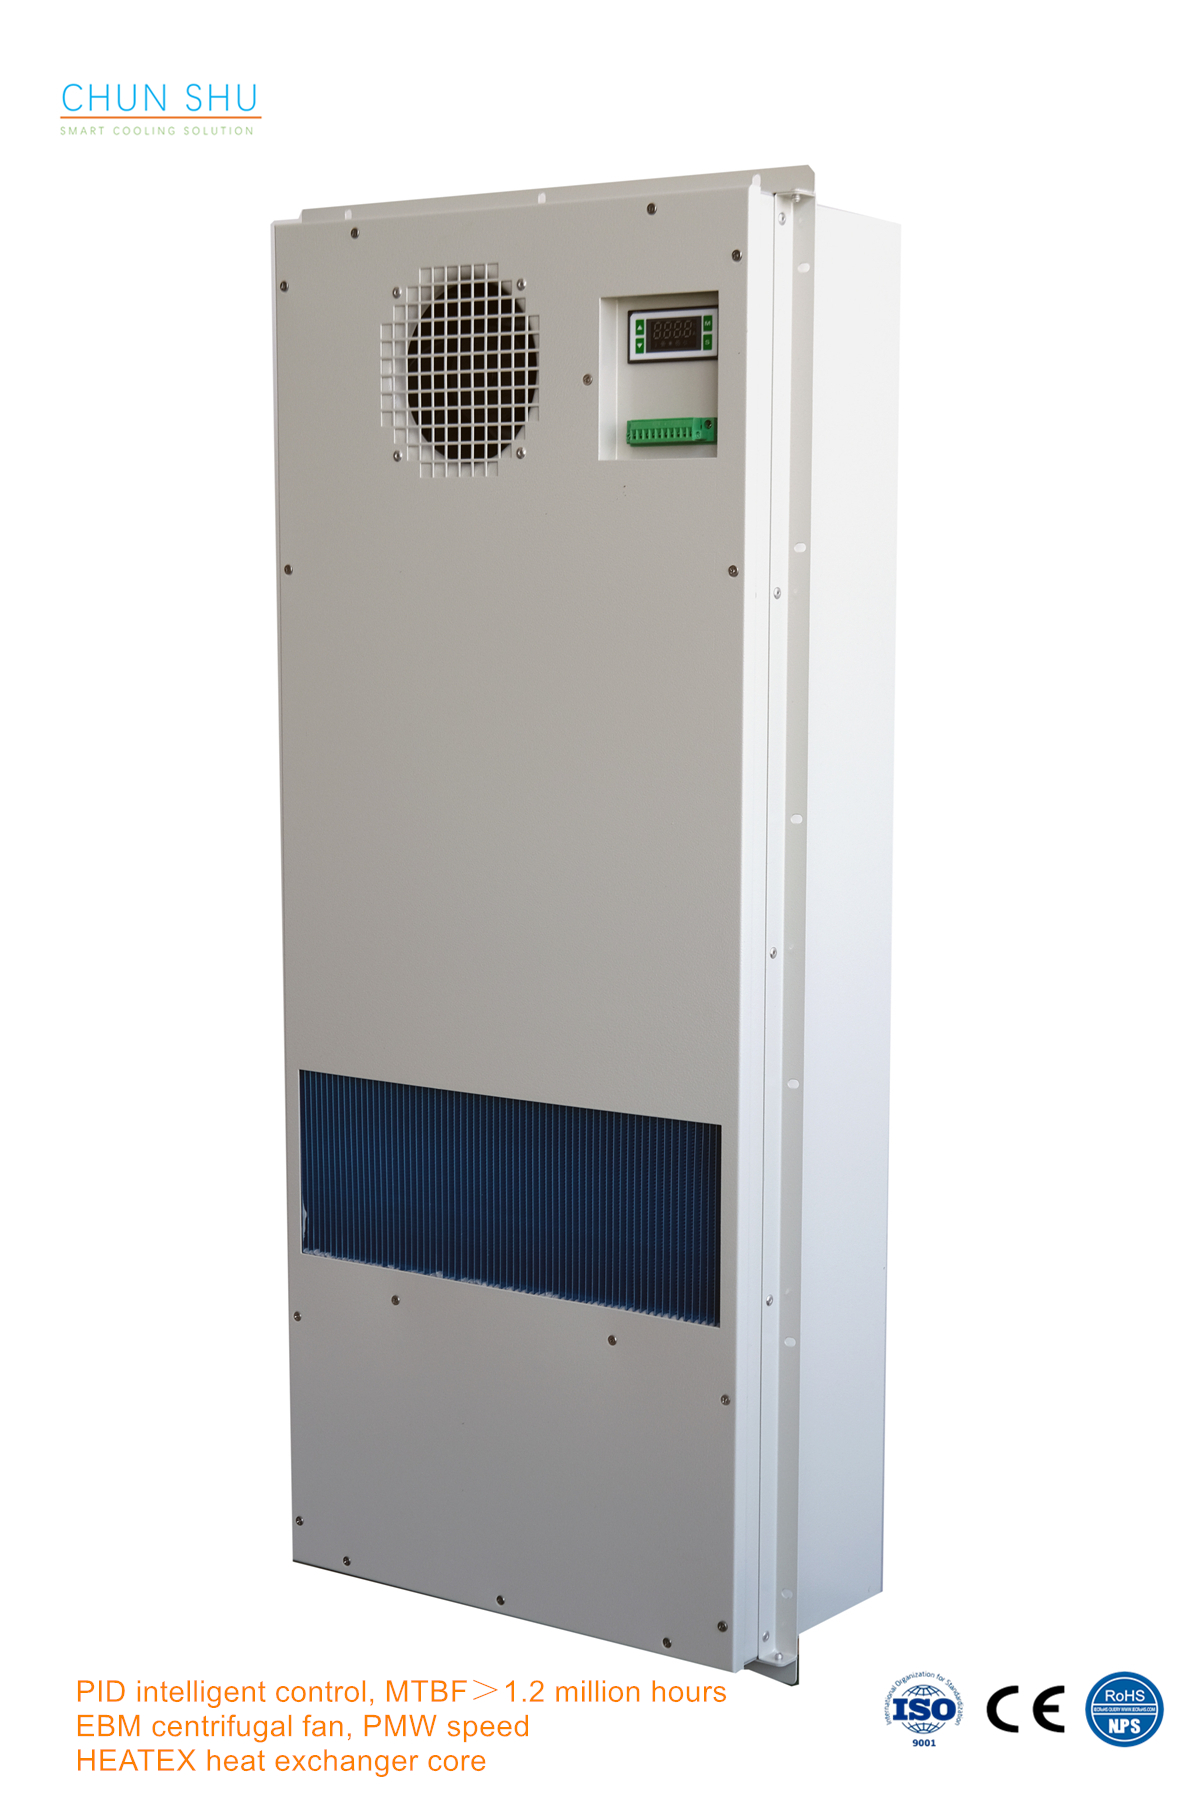 120W/K DC Powered Door Mounted Cabinet Heat Exchanger, Air Cooling Units for Telecom Outdoor Electrical Cabinets